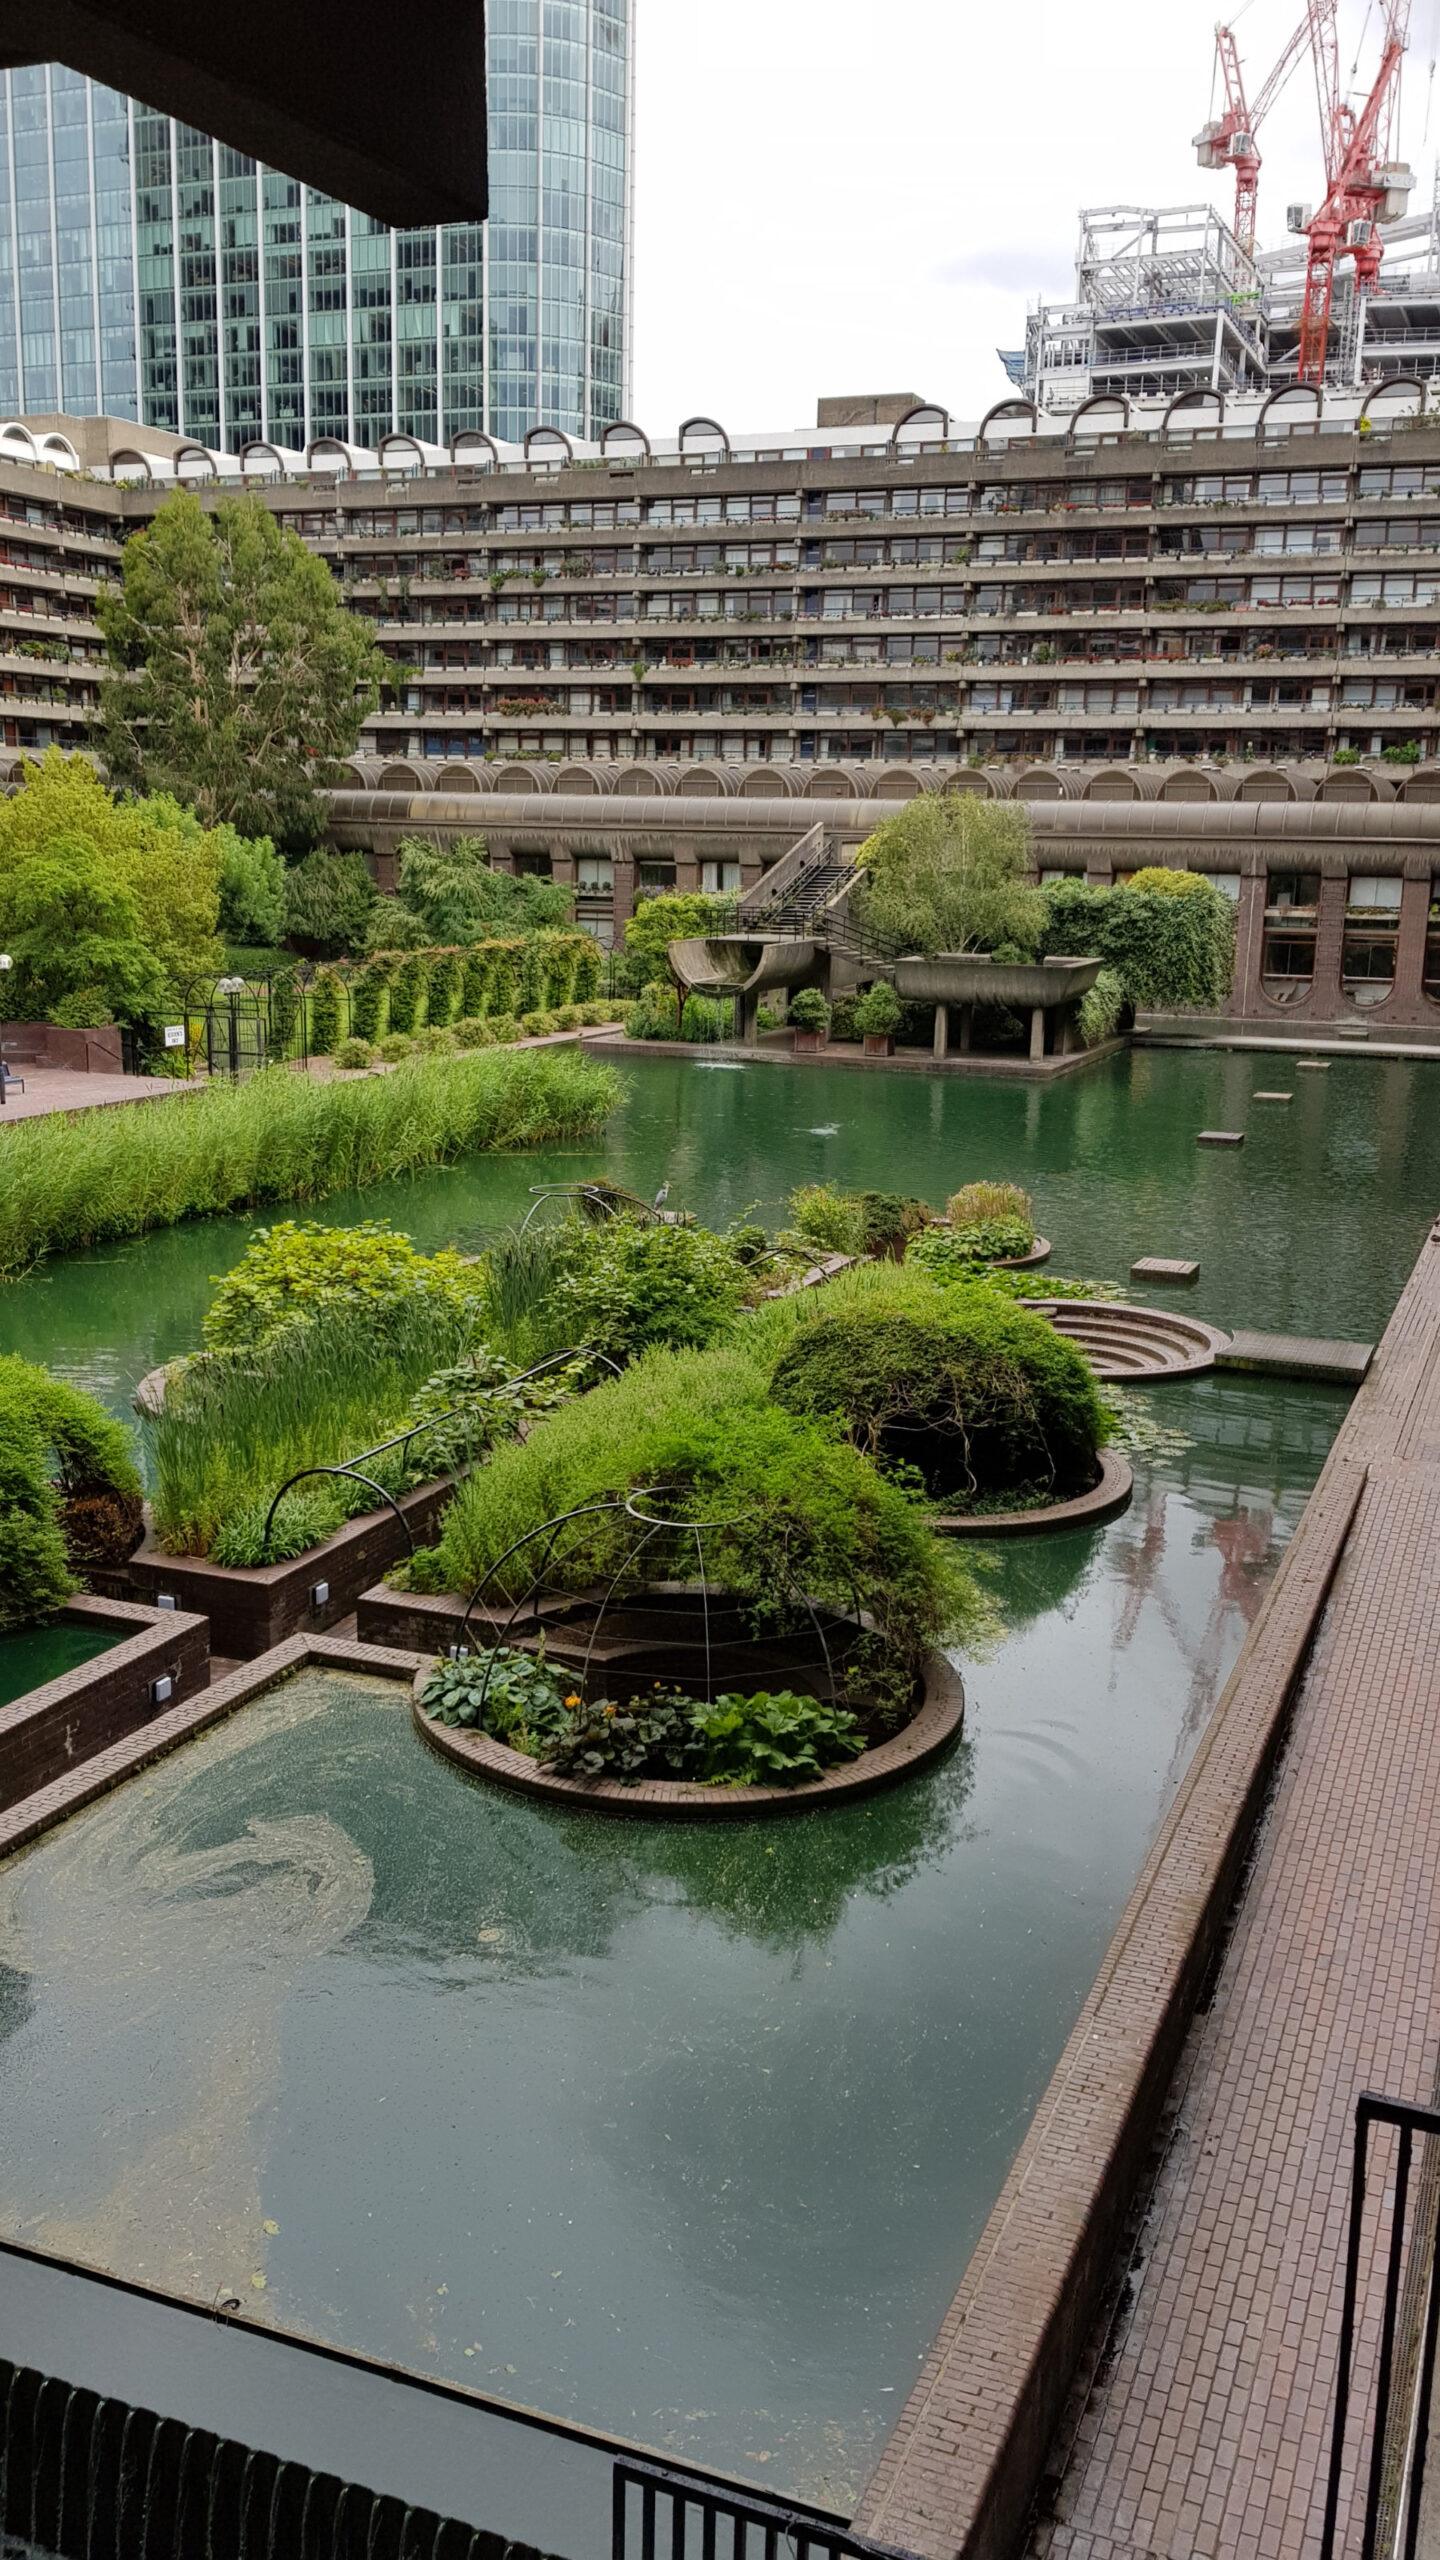 The Barbican, Brutalism at its best